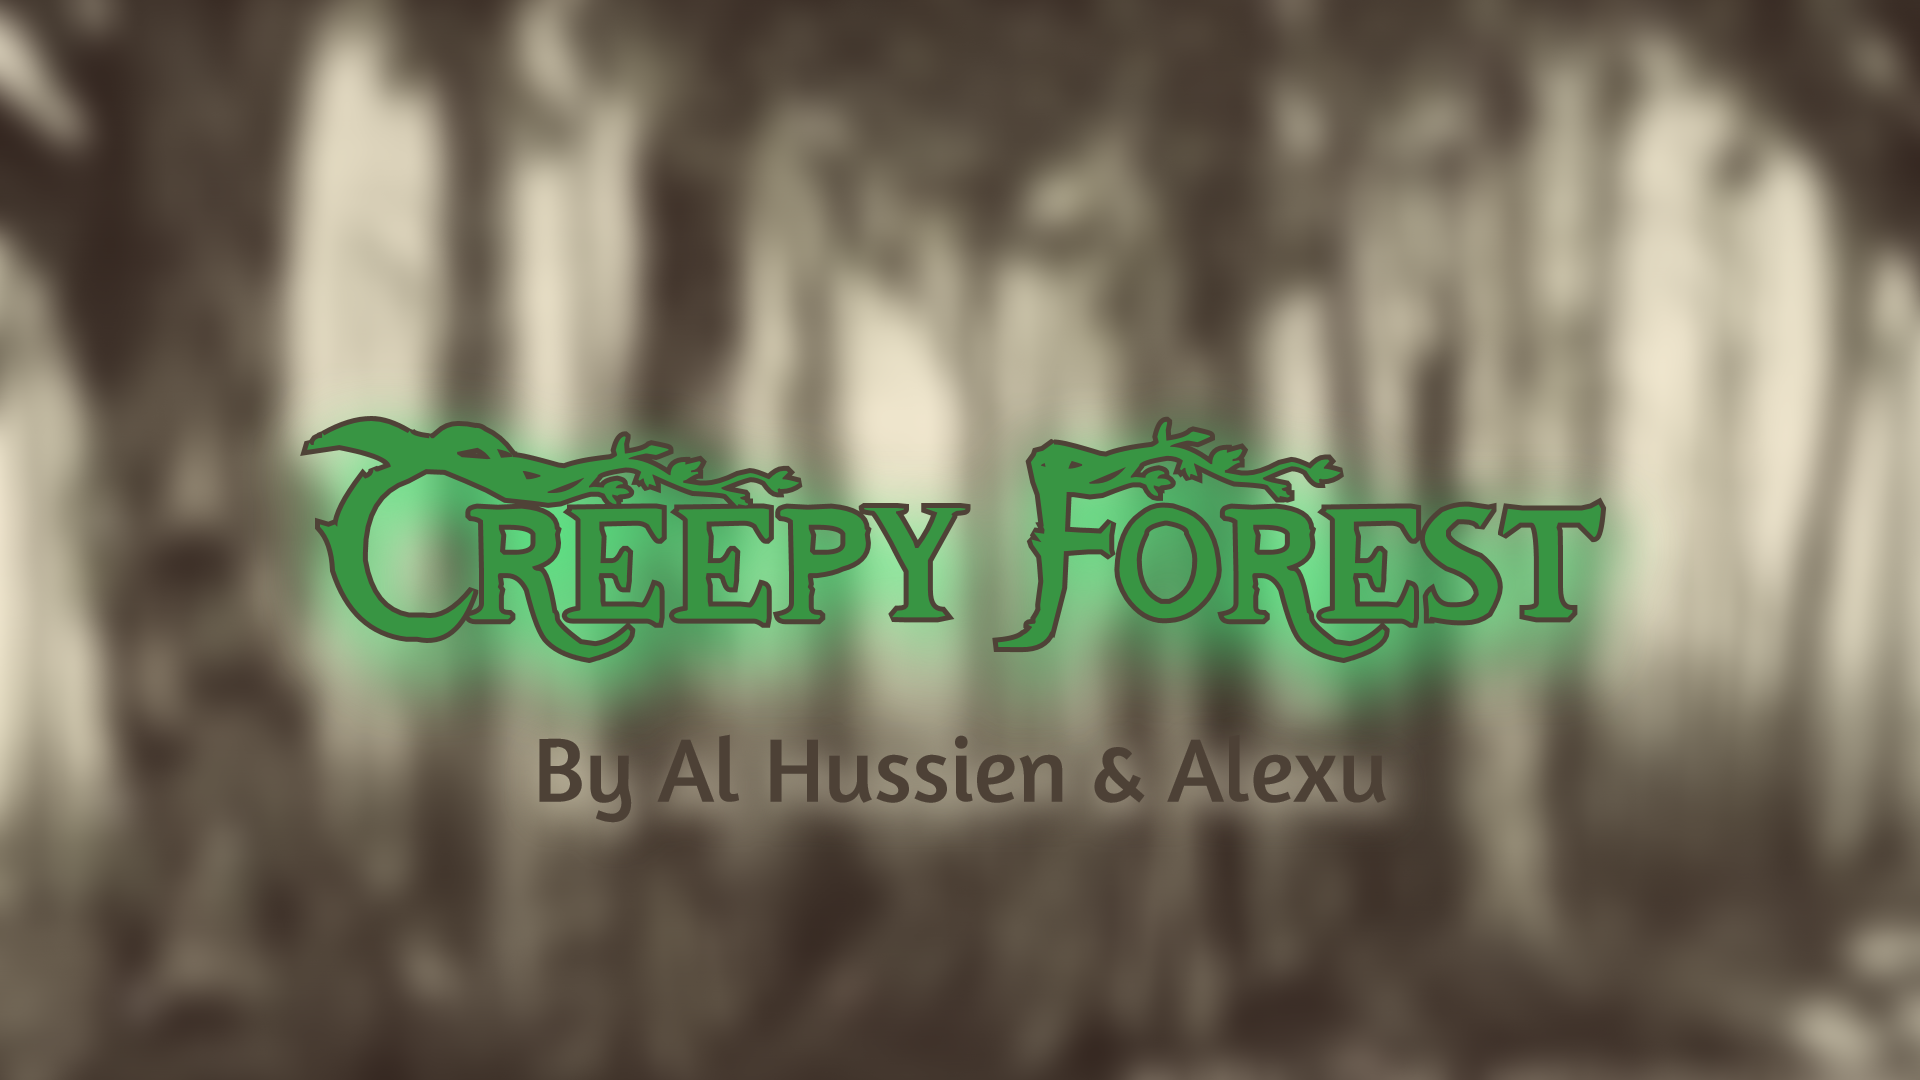 The Creepy Forest